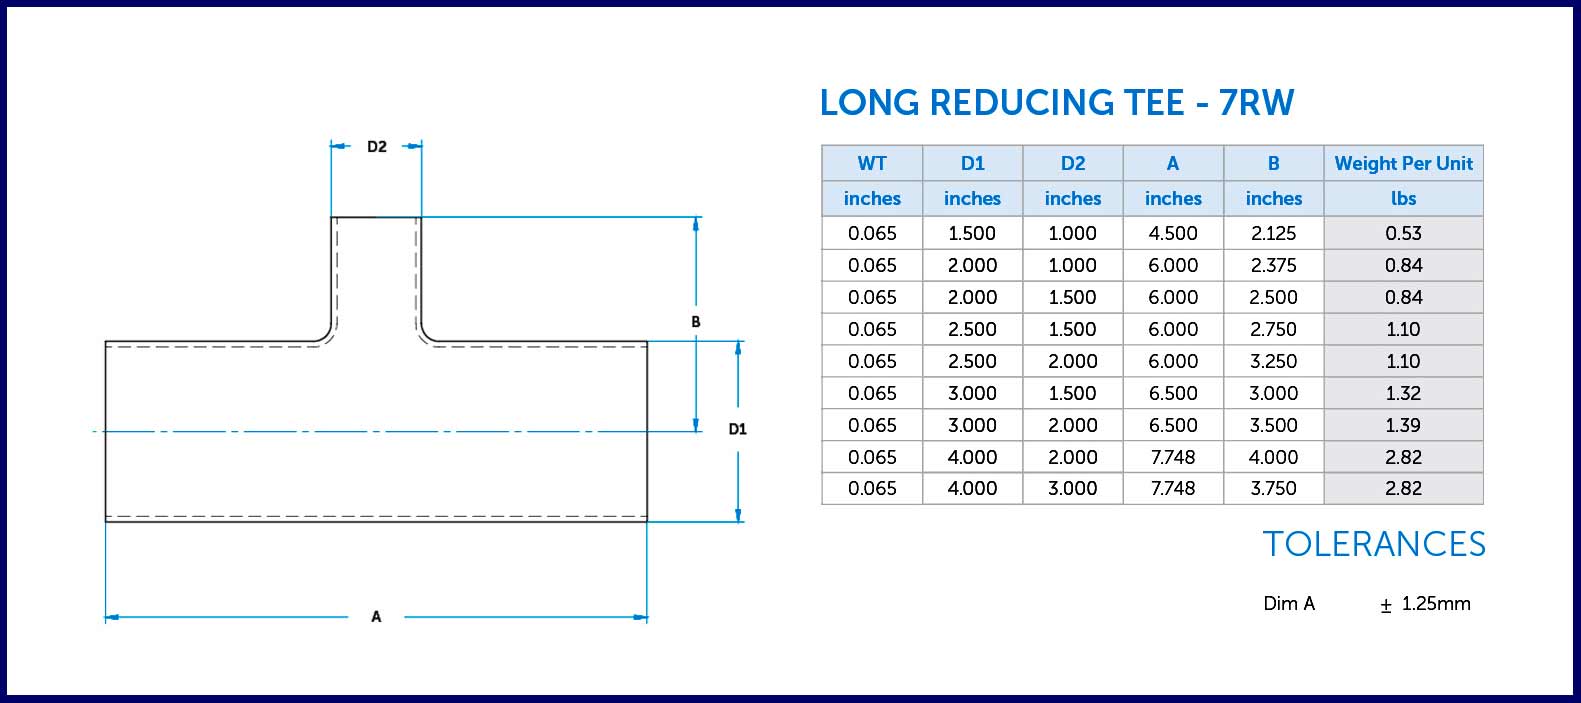 This is a diagram of a long reducing tee from Ultibend.